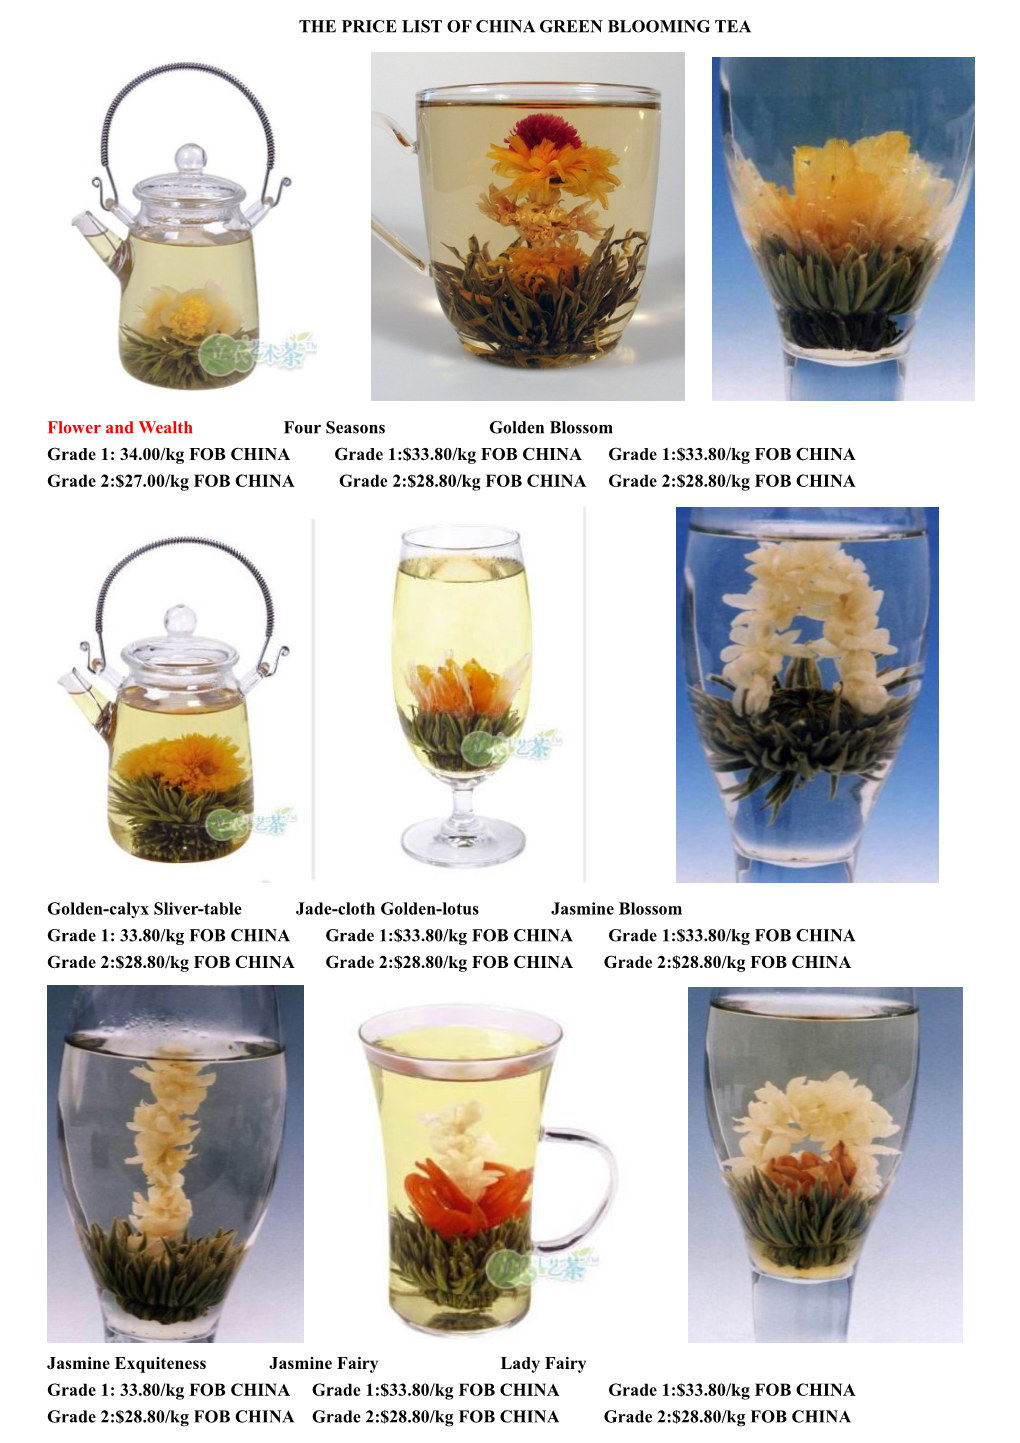 The Price List of China Green Blooming Tea